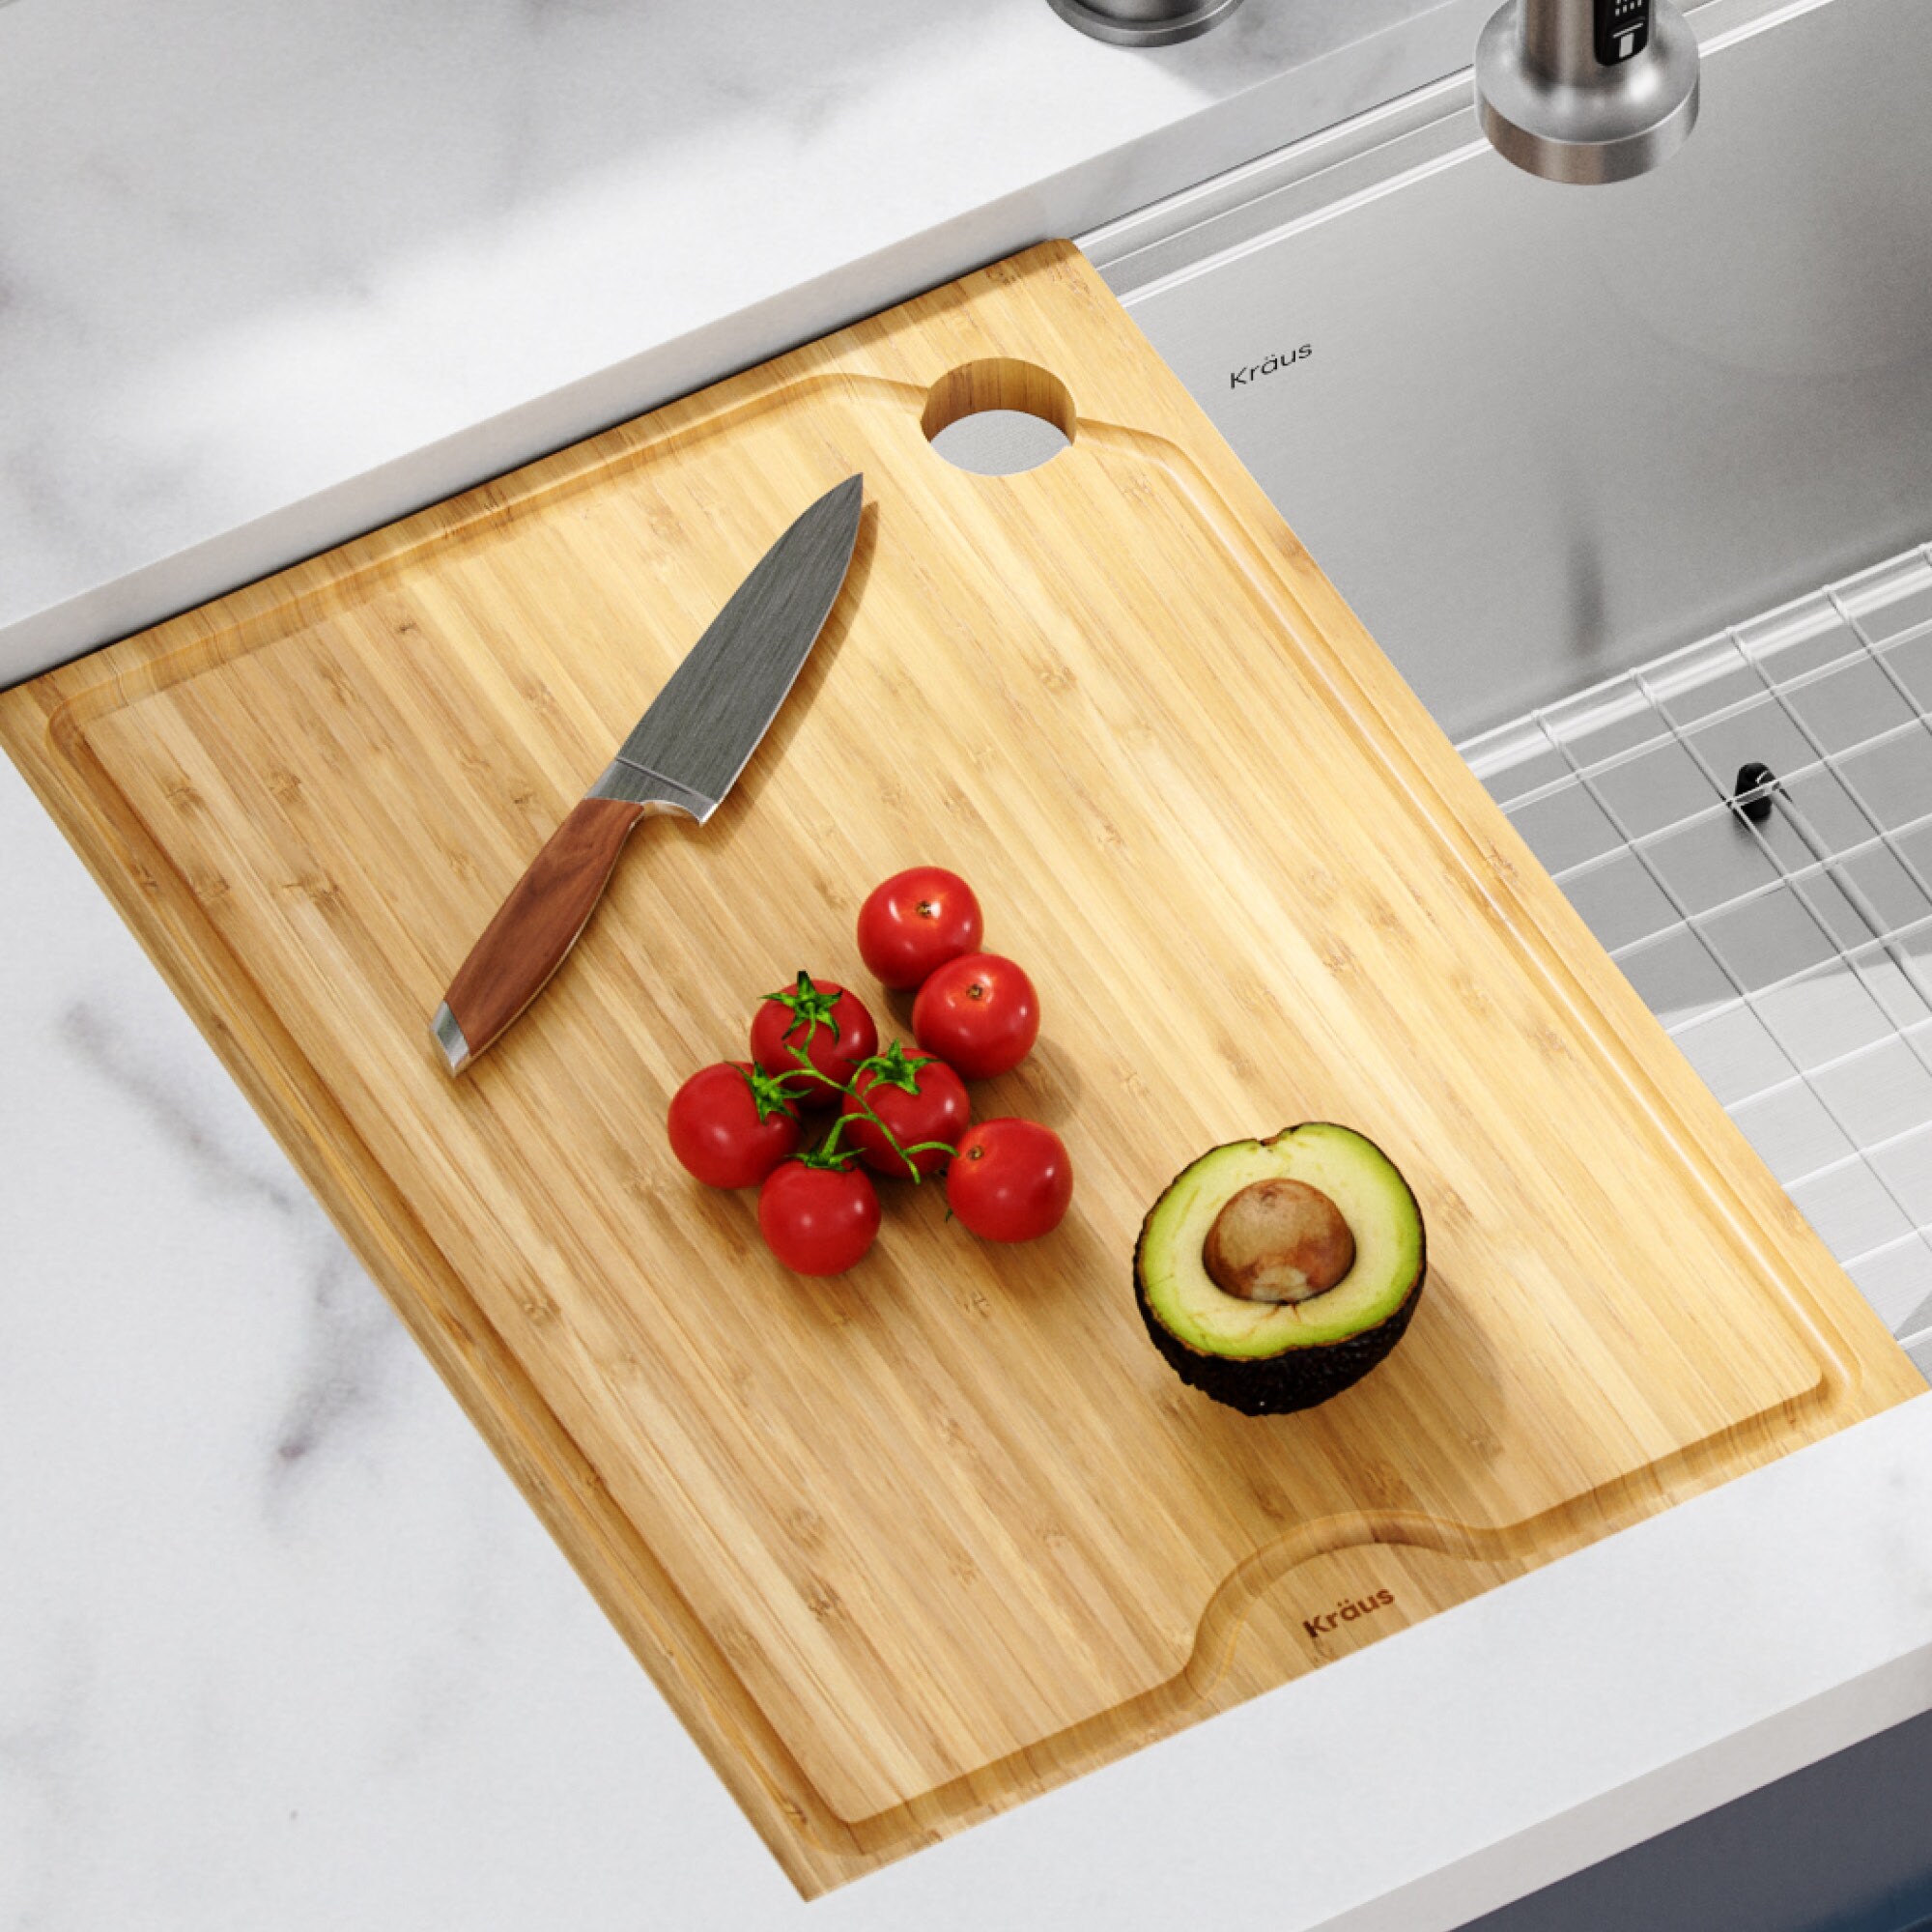 Kraus Organic Solid Bamboo Cutting Board for Kitchen Sink, 18.5 x 12